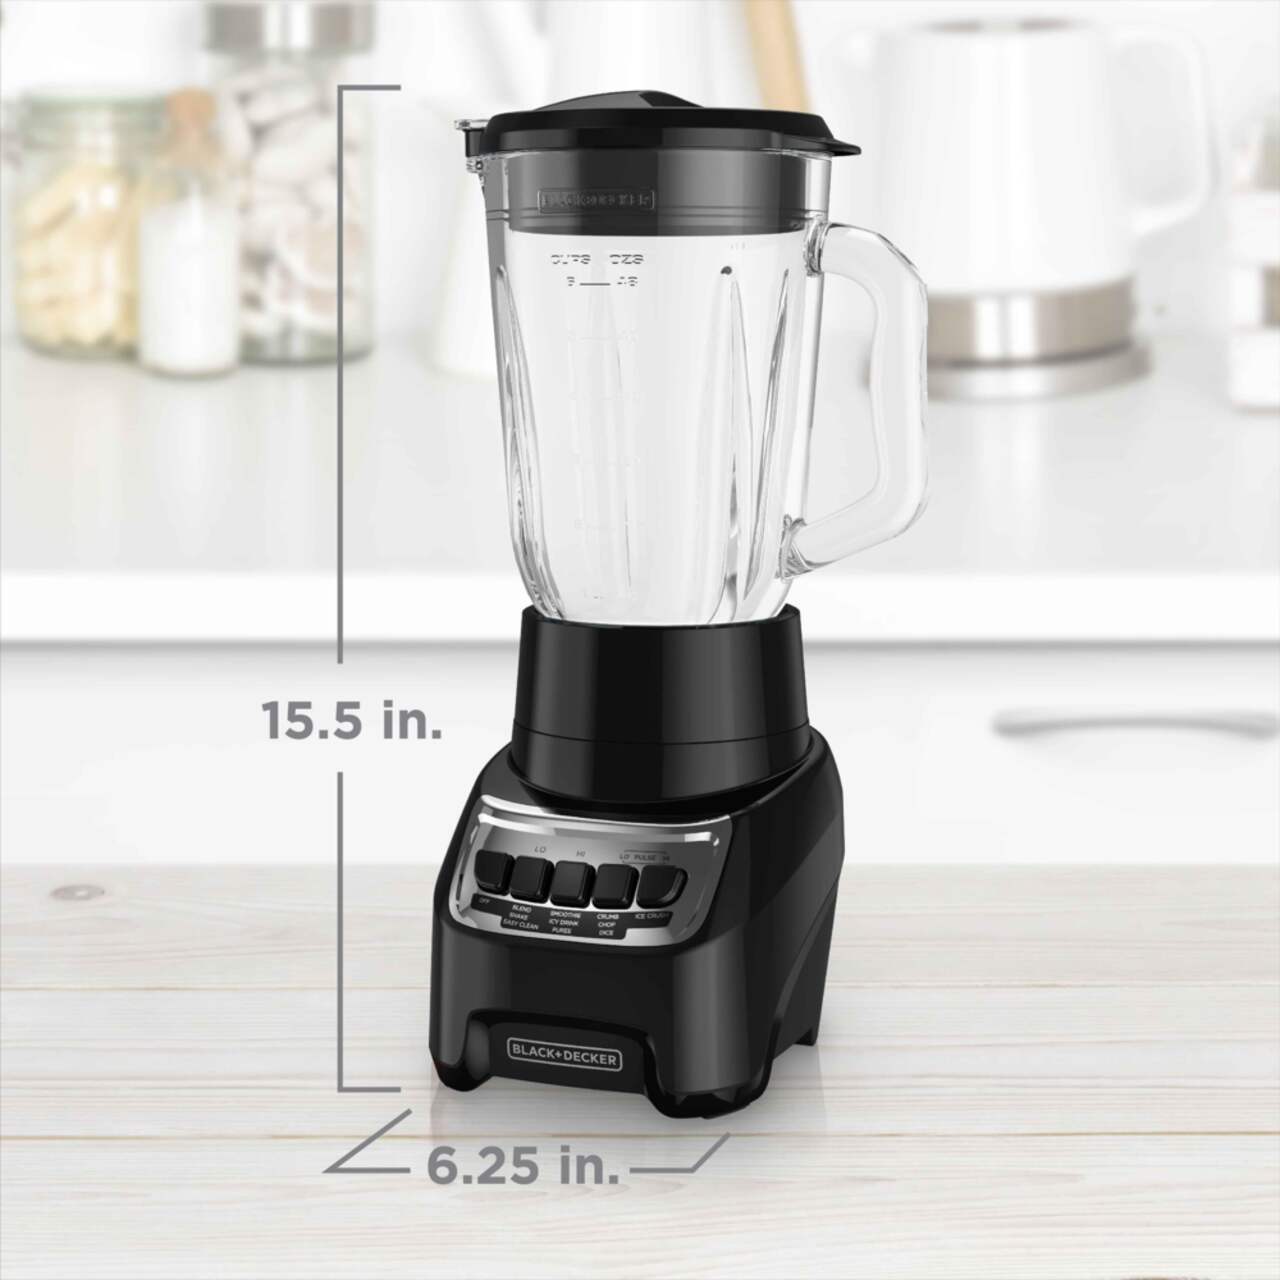 https://media-www.canadiantire.ca/product/living/kitchen/kitchen-appliances/0431368/black-decker-power-crush-piano-key-blender-55ce2608-e4cd-442b-b261-2cbe28a9ecab.png?imdensity=1&imwidth=1244&impolicy=mZoom